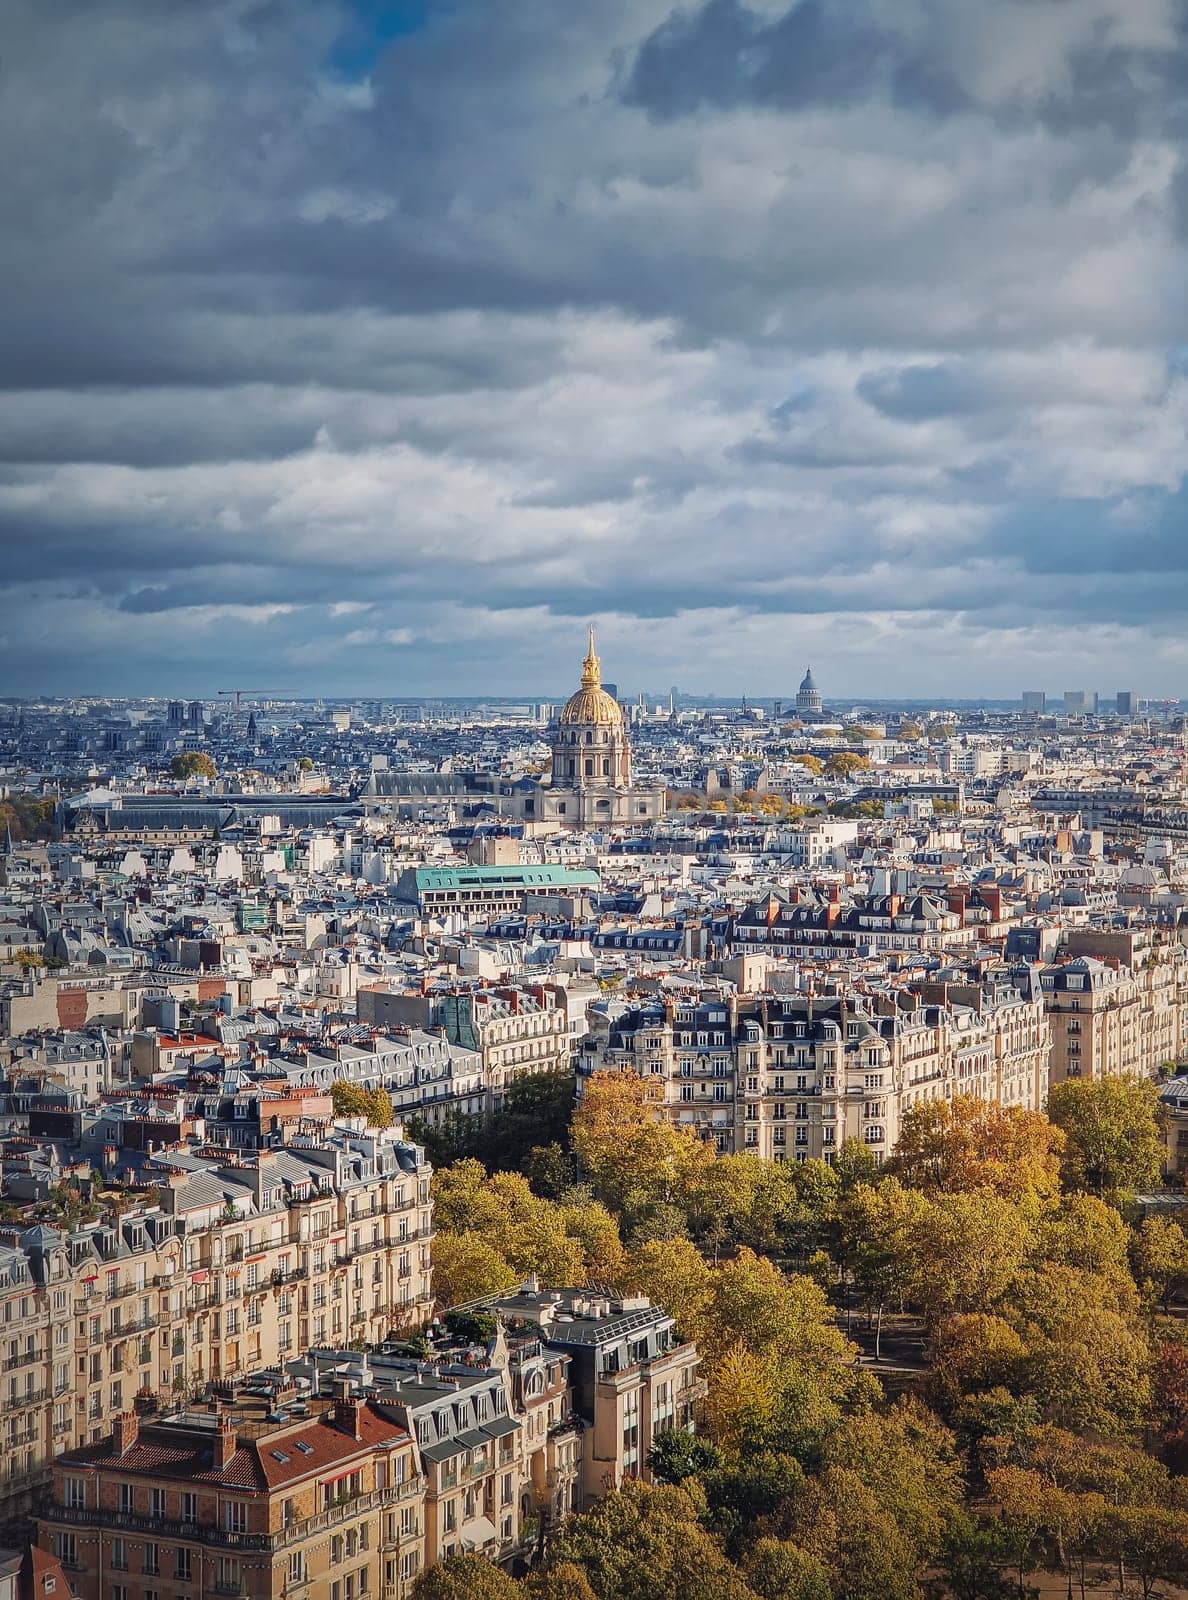 Scenery aerial view from the Eiffel tower height over the Paris city, France. Les Invalides building with golden dome seen on the horizon. Autumn parisian cityscape